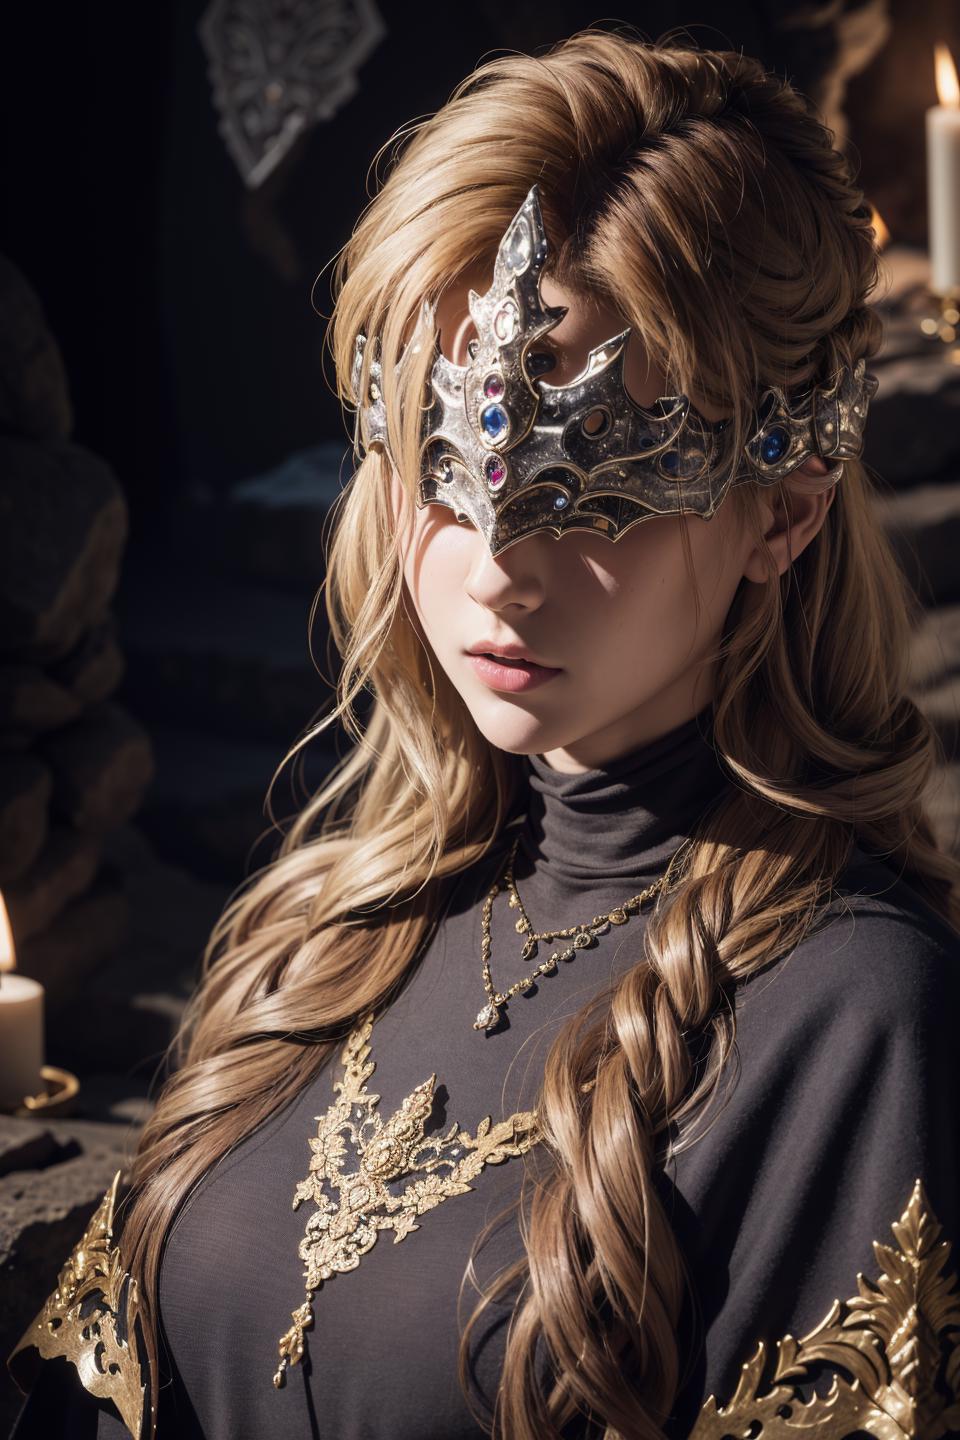 A woman wearing a gold and silver mask and a black top.